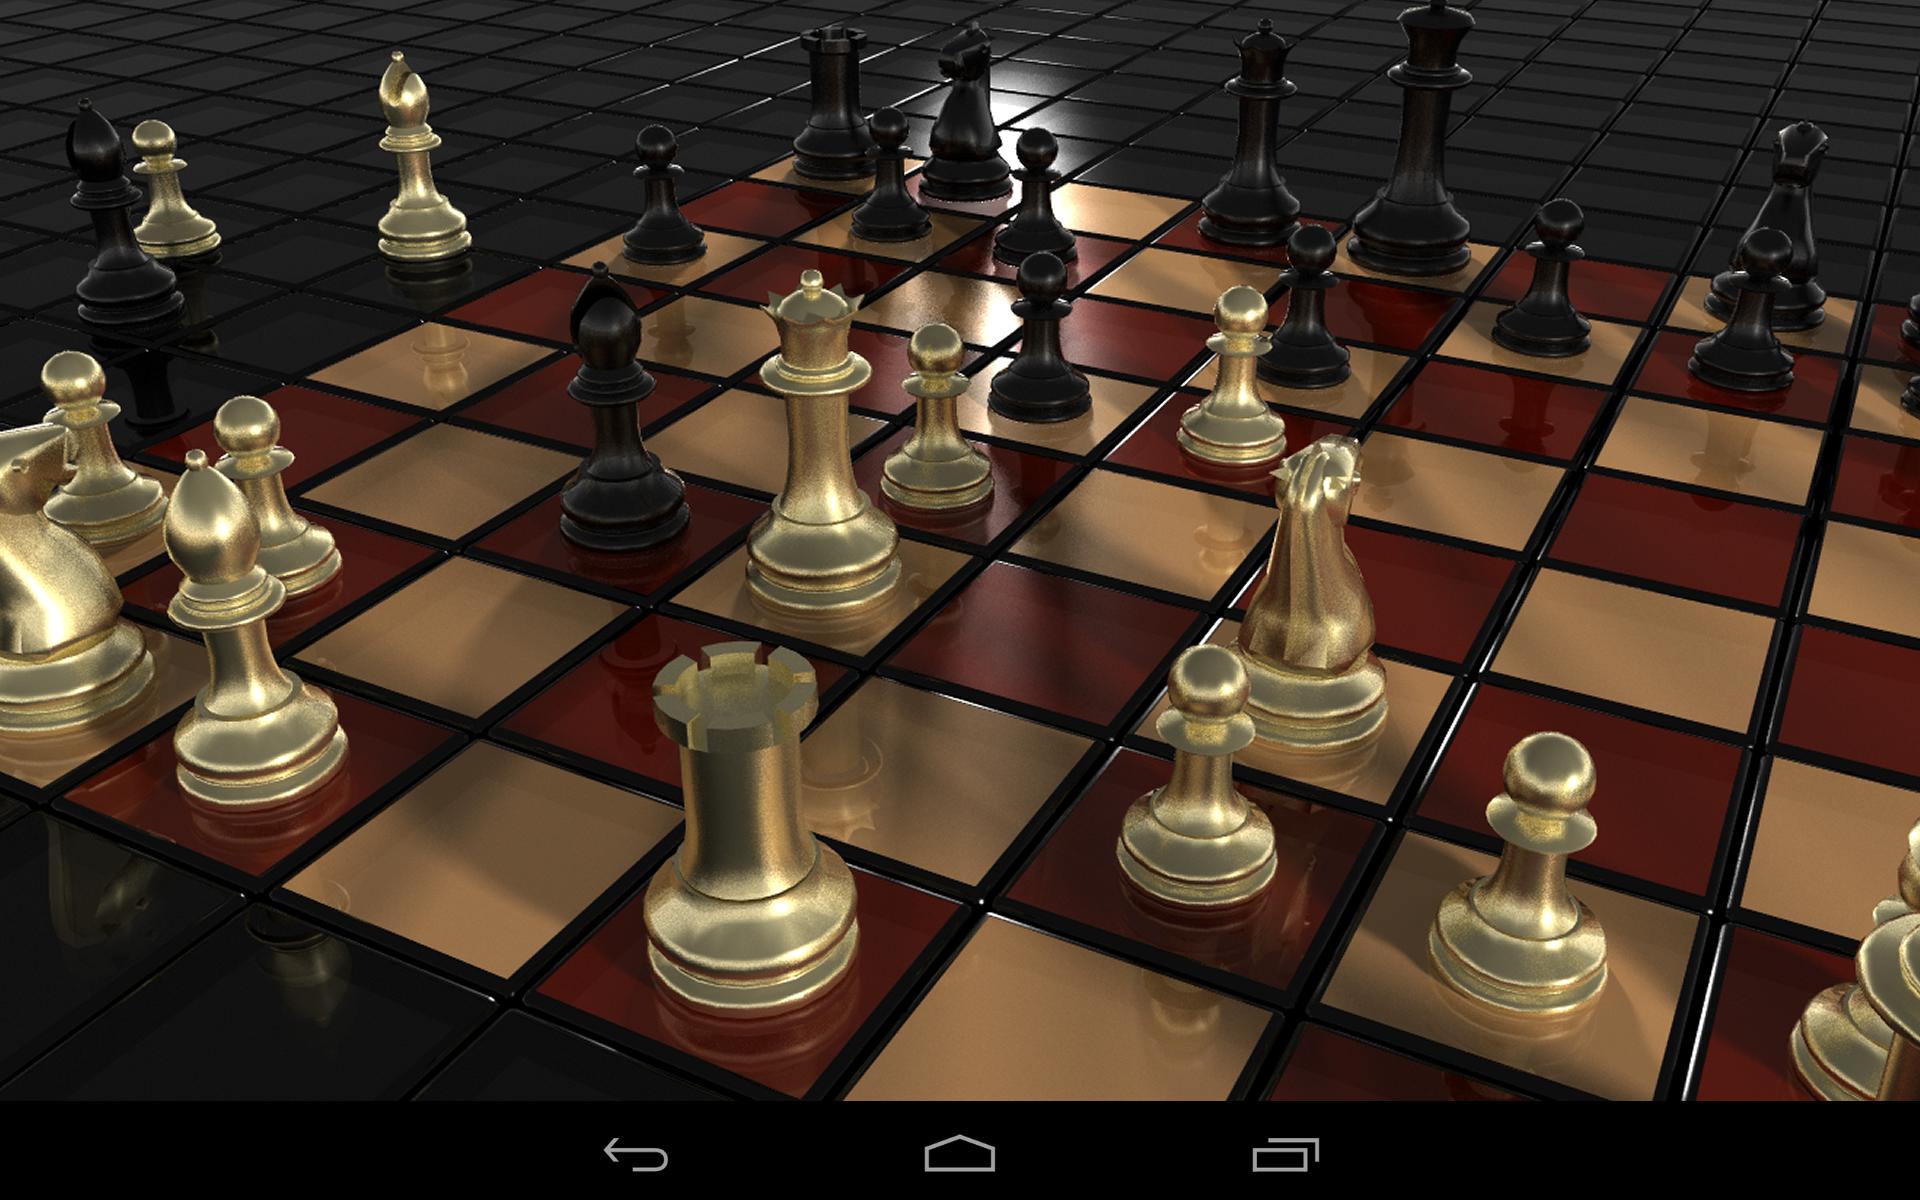 3D Chess Game for Android - APK Download